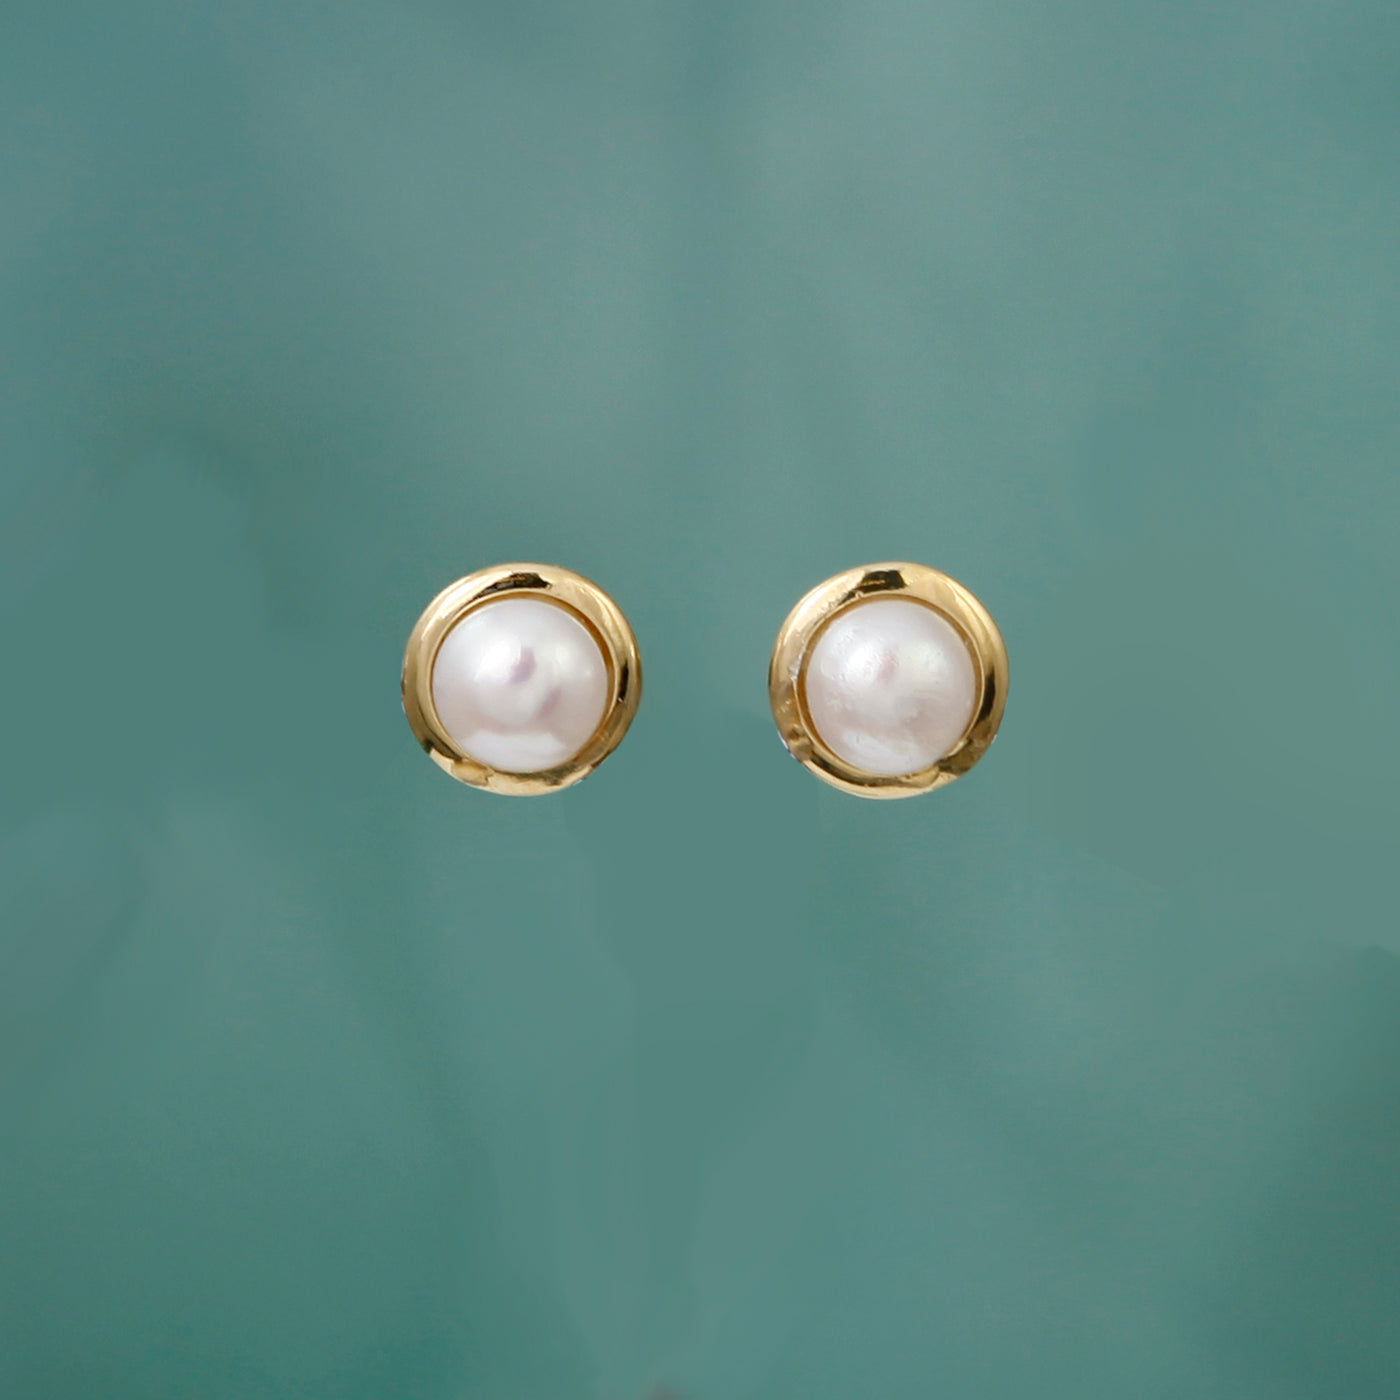 Gold Stud Earrings With Pearl